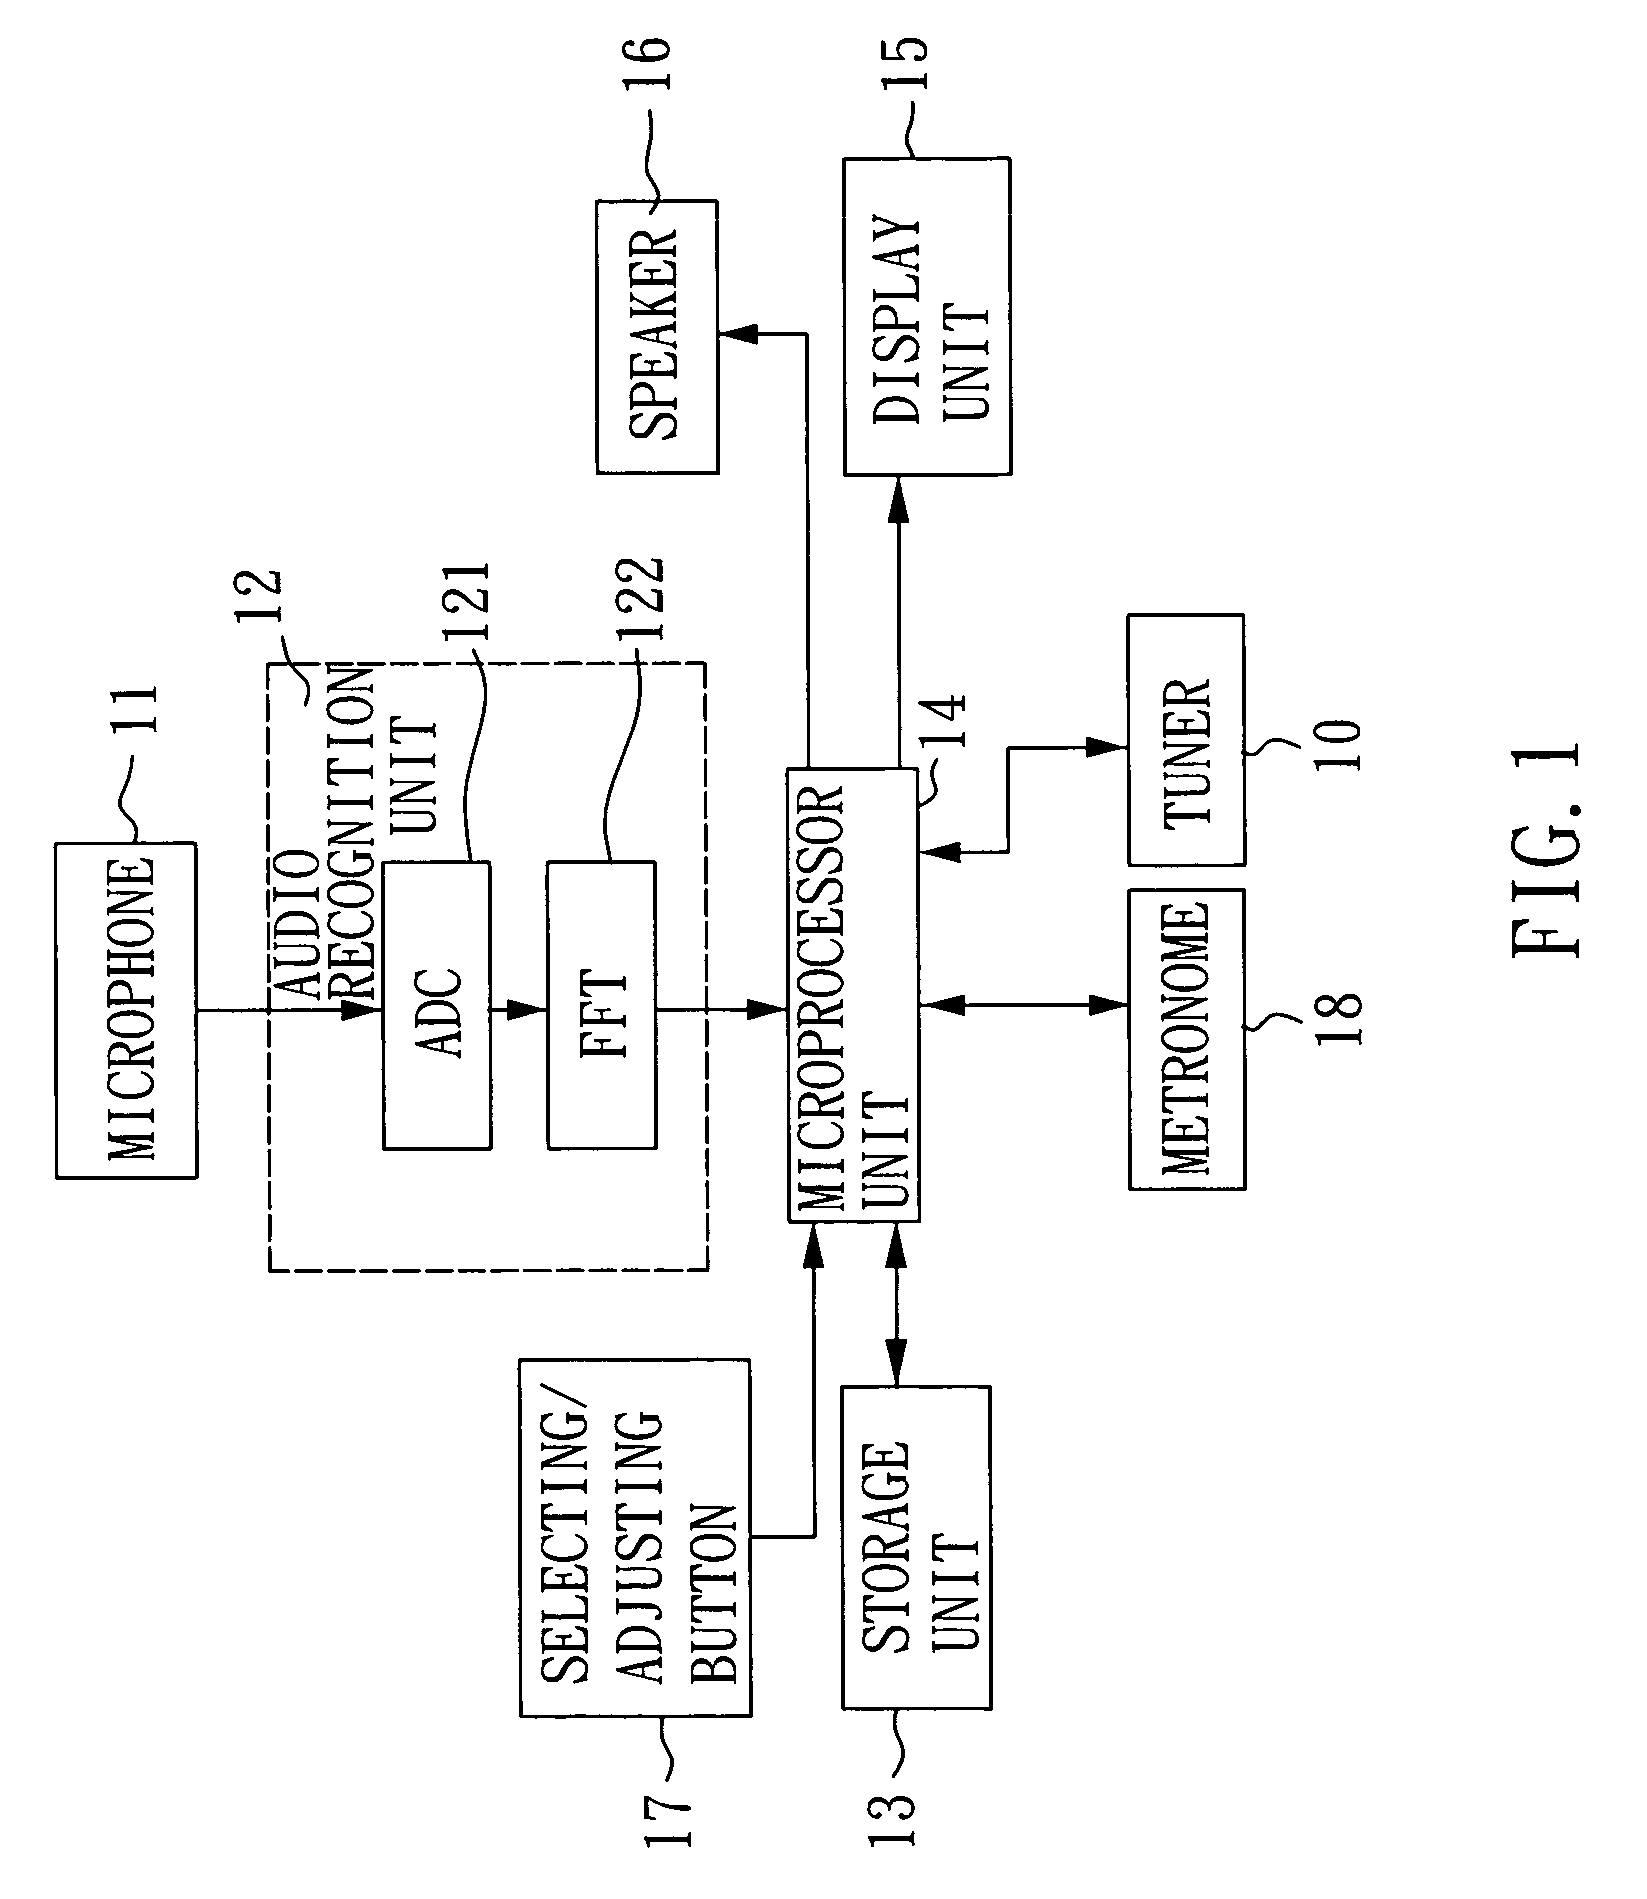 Electronic musical score device